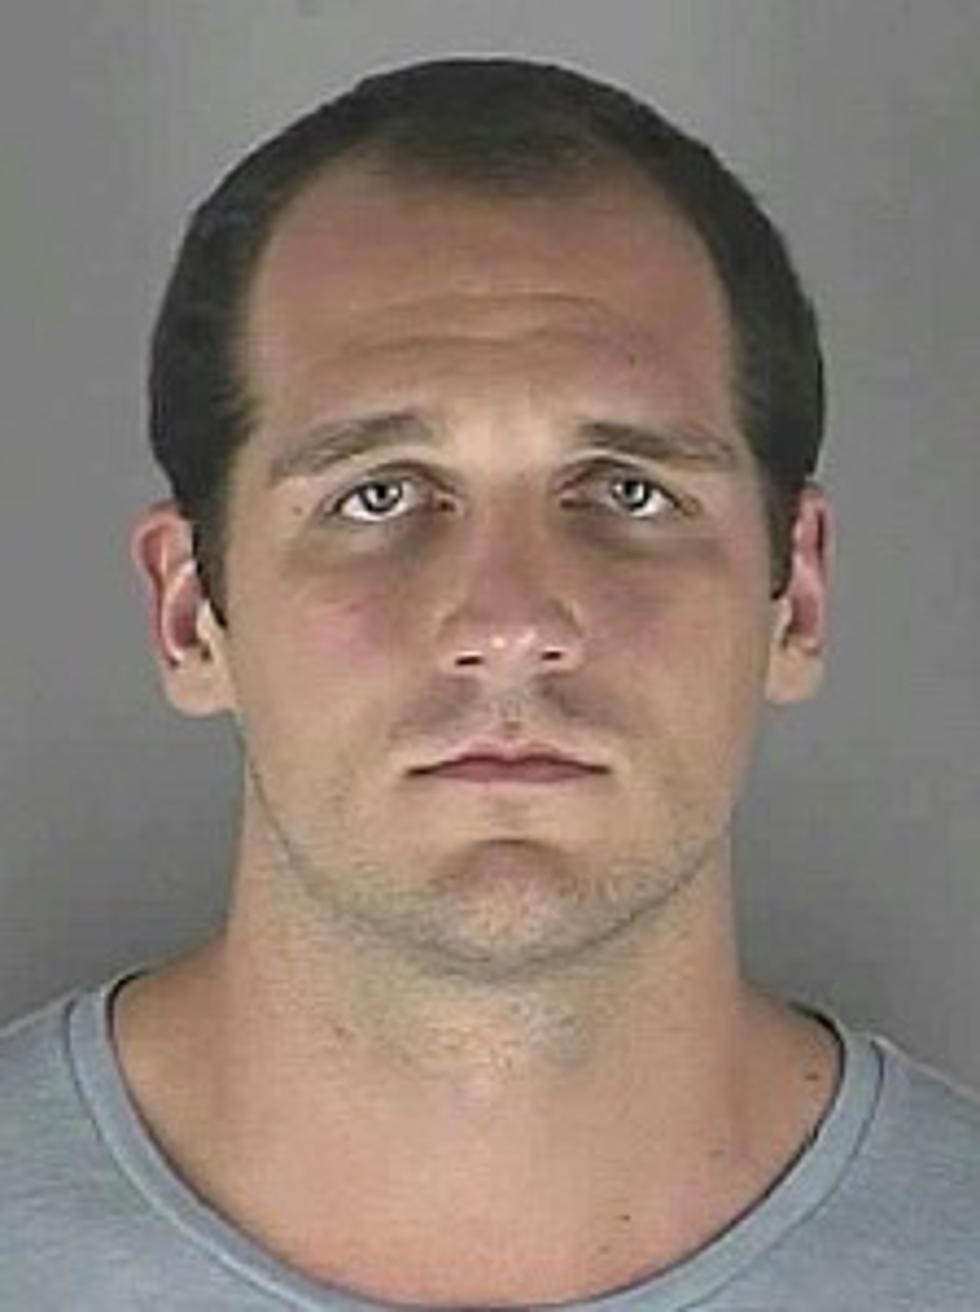 Brother Of Deceased NHL Player Boogaard Arrested